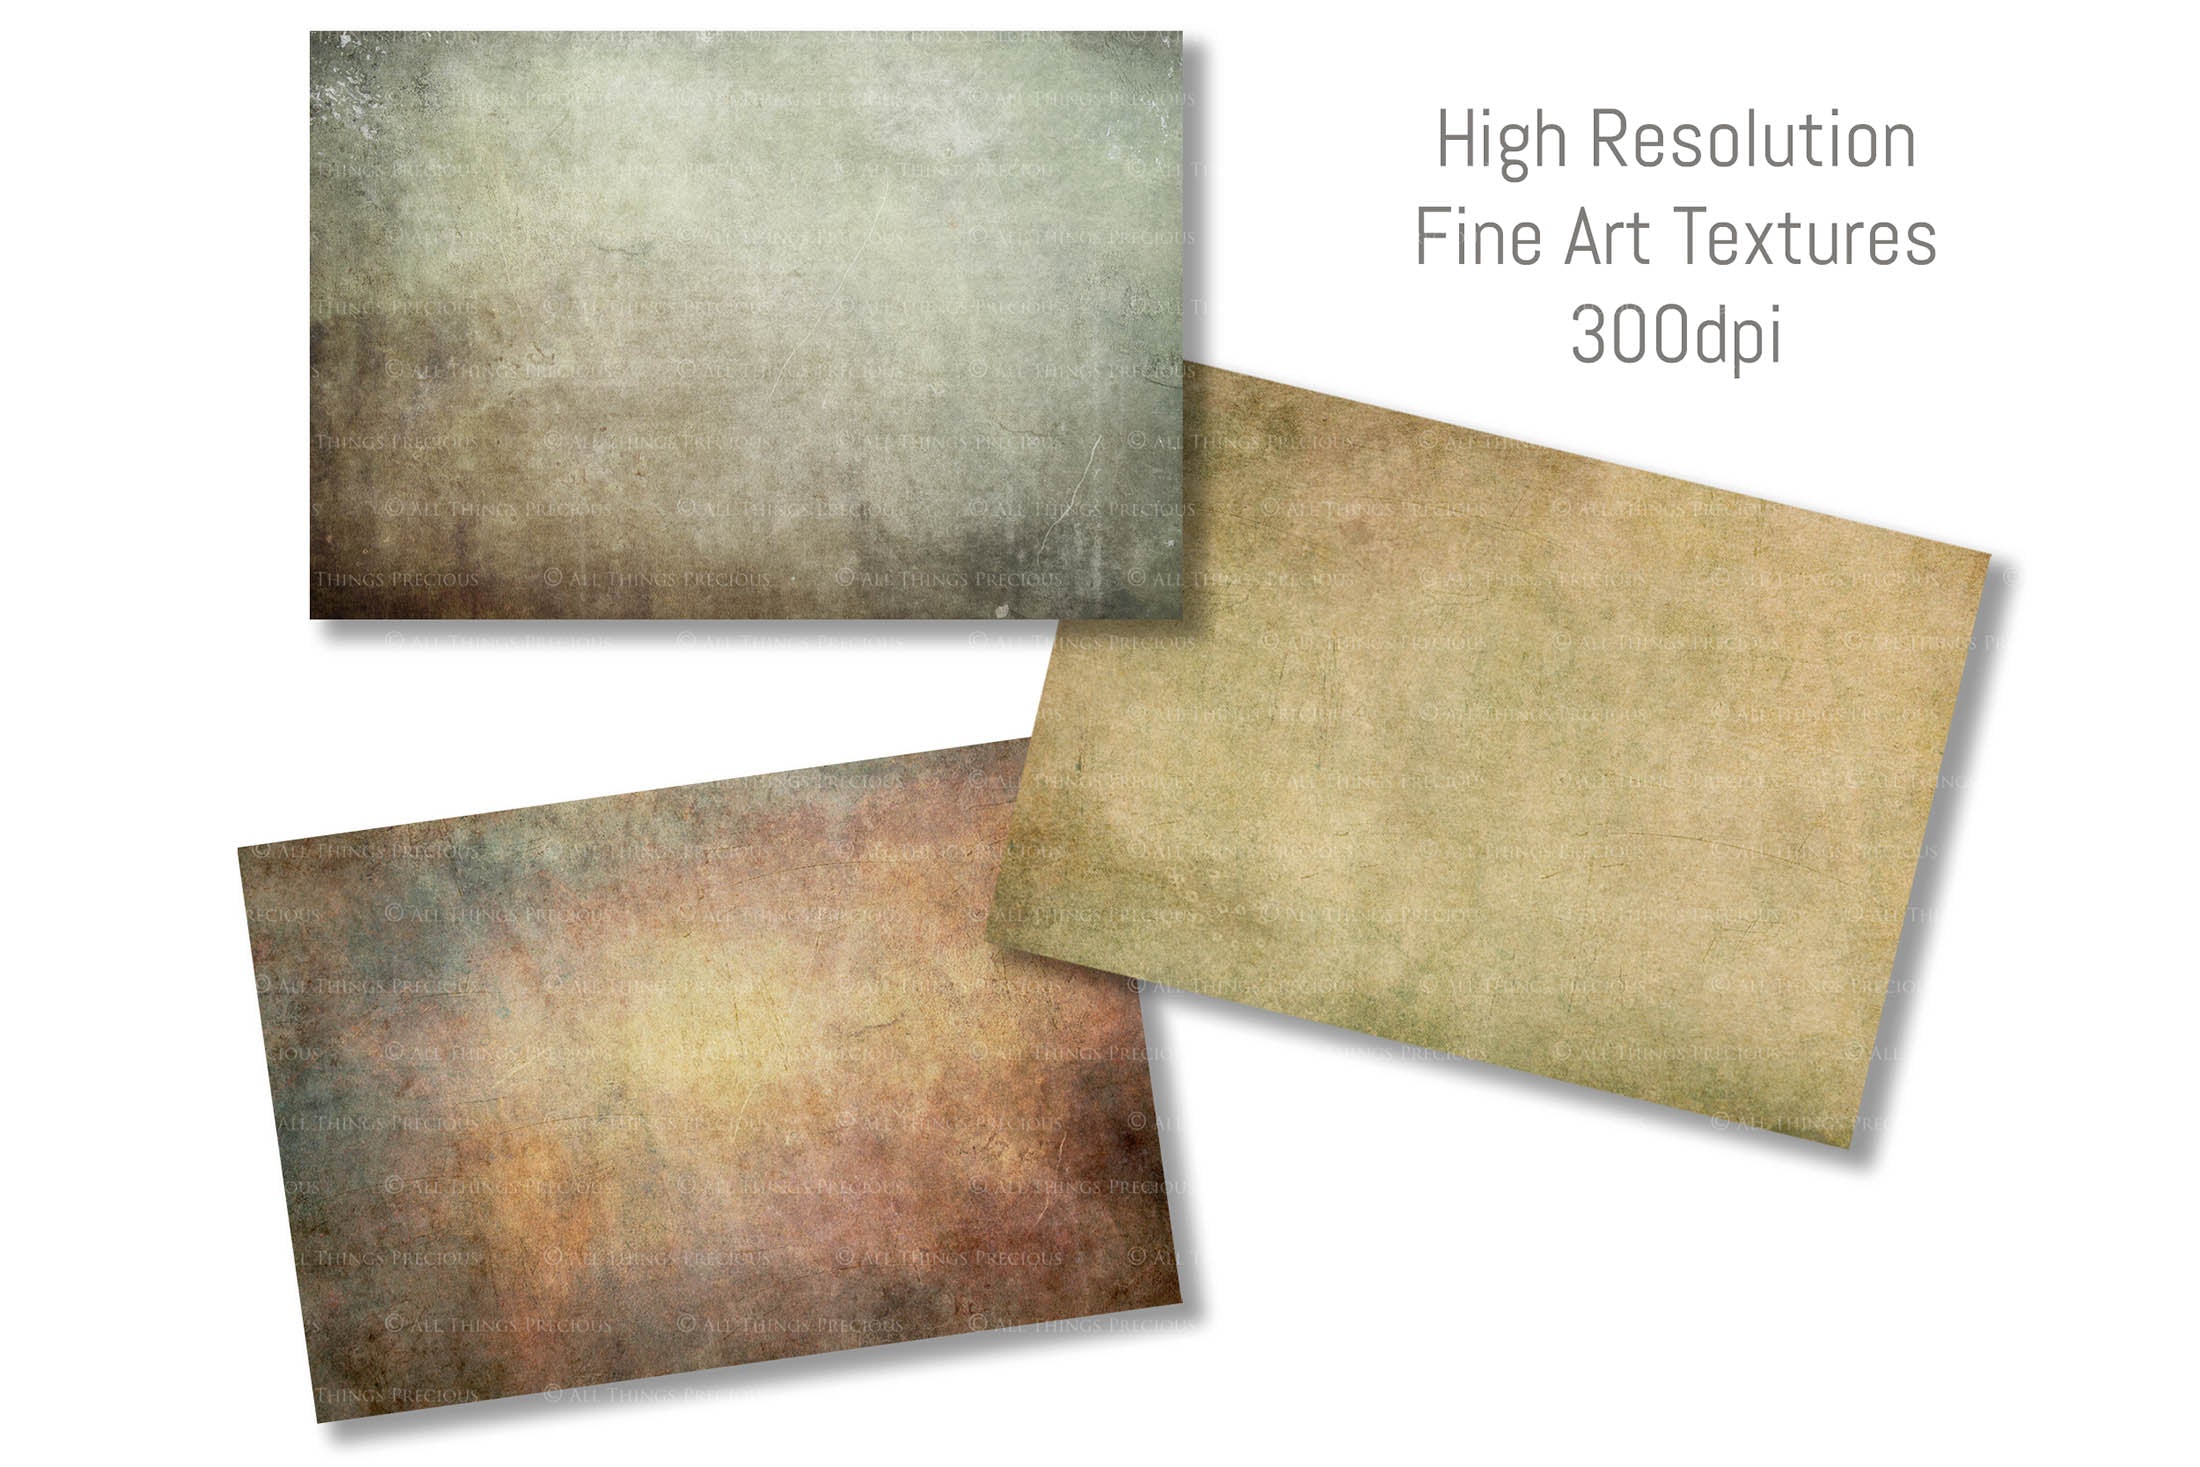 Fine art textures for photographers, digital editing. Photo Overlays. Antique, Vintage, Grunge, Light, Bundle. Textured printable Canvas, Colour, black and white, Bundle. High resolution, 300dpi Graphic Assets for photography, scrapbooking and design. By ATP Textures